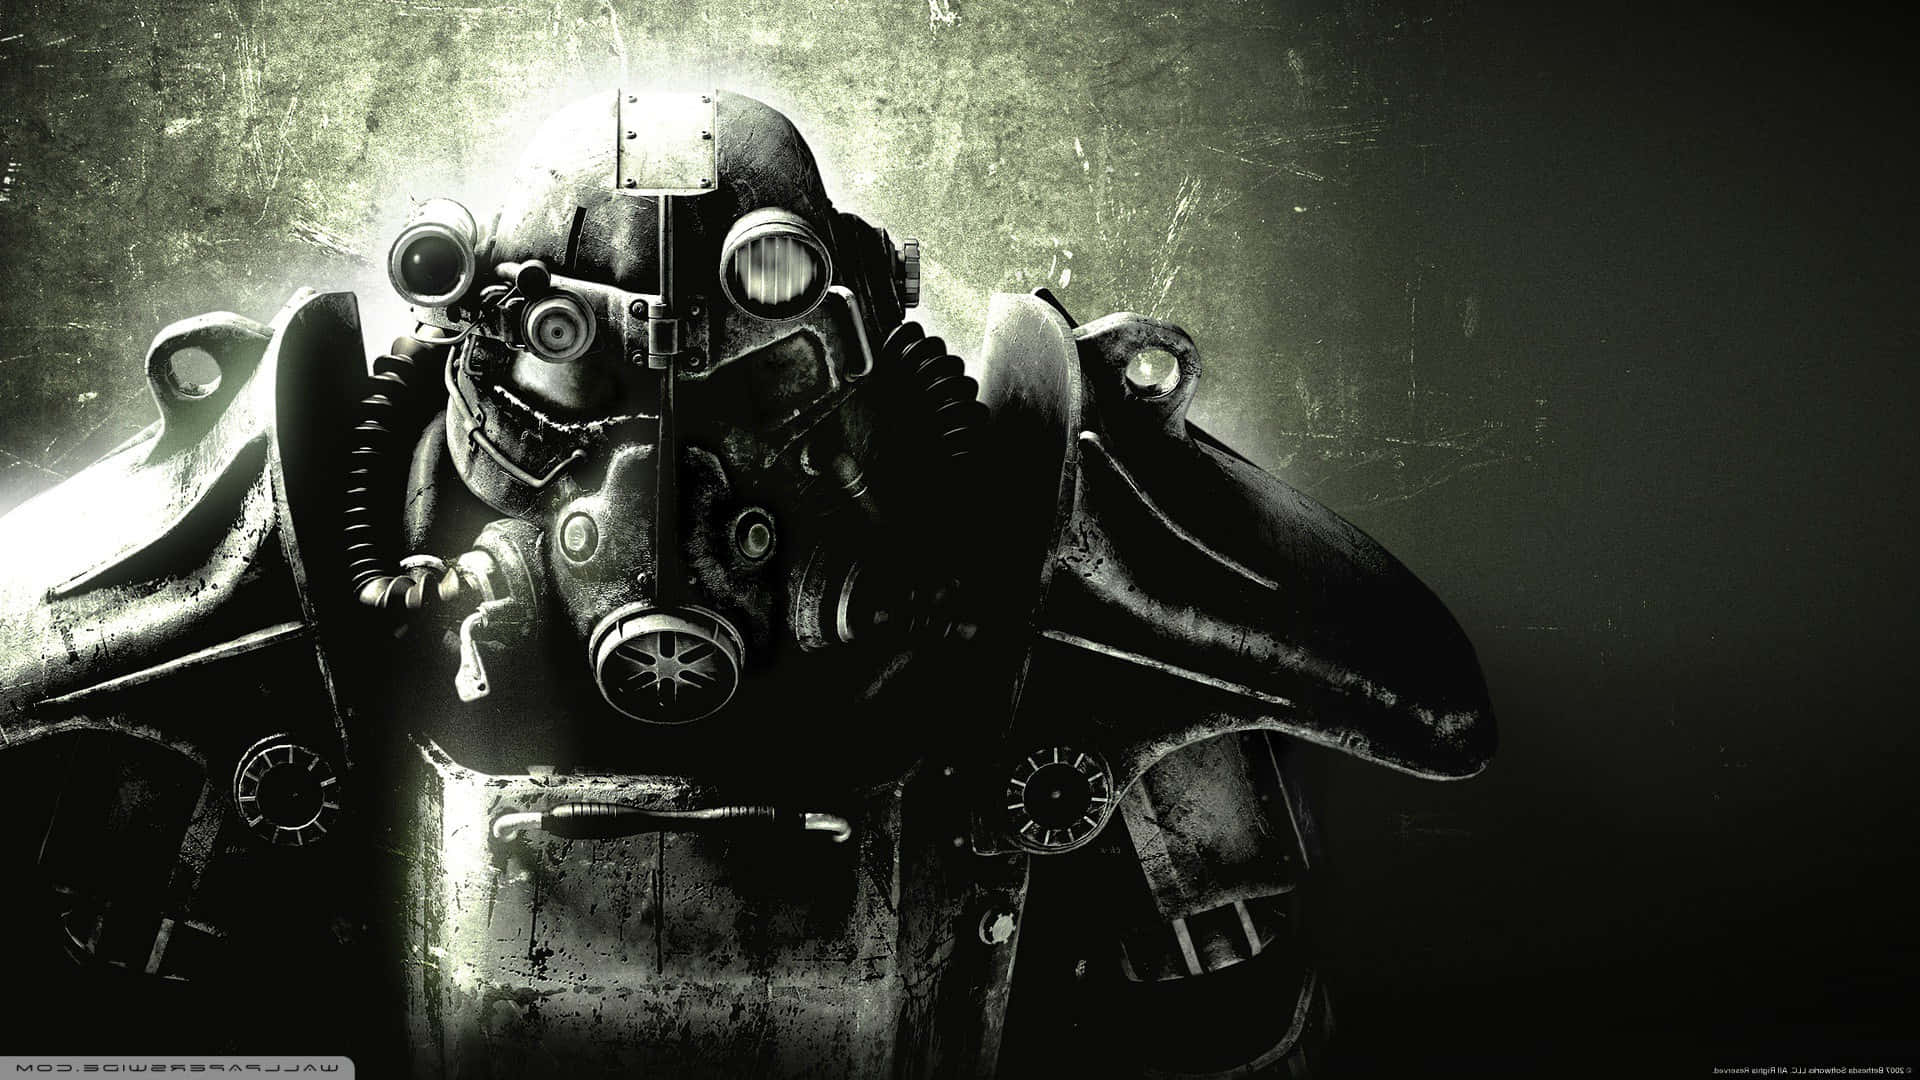 A soldier in power armor from Fallout: Brotherhood of Steel stands guard in a desolate wasteland Wallpaper